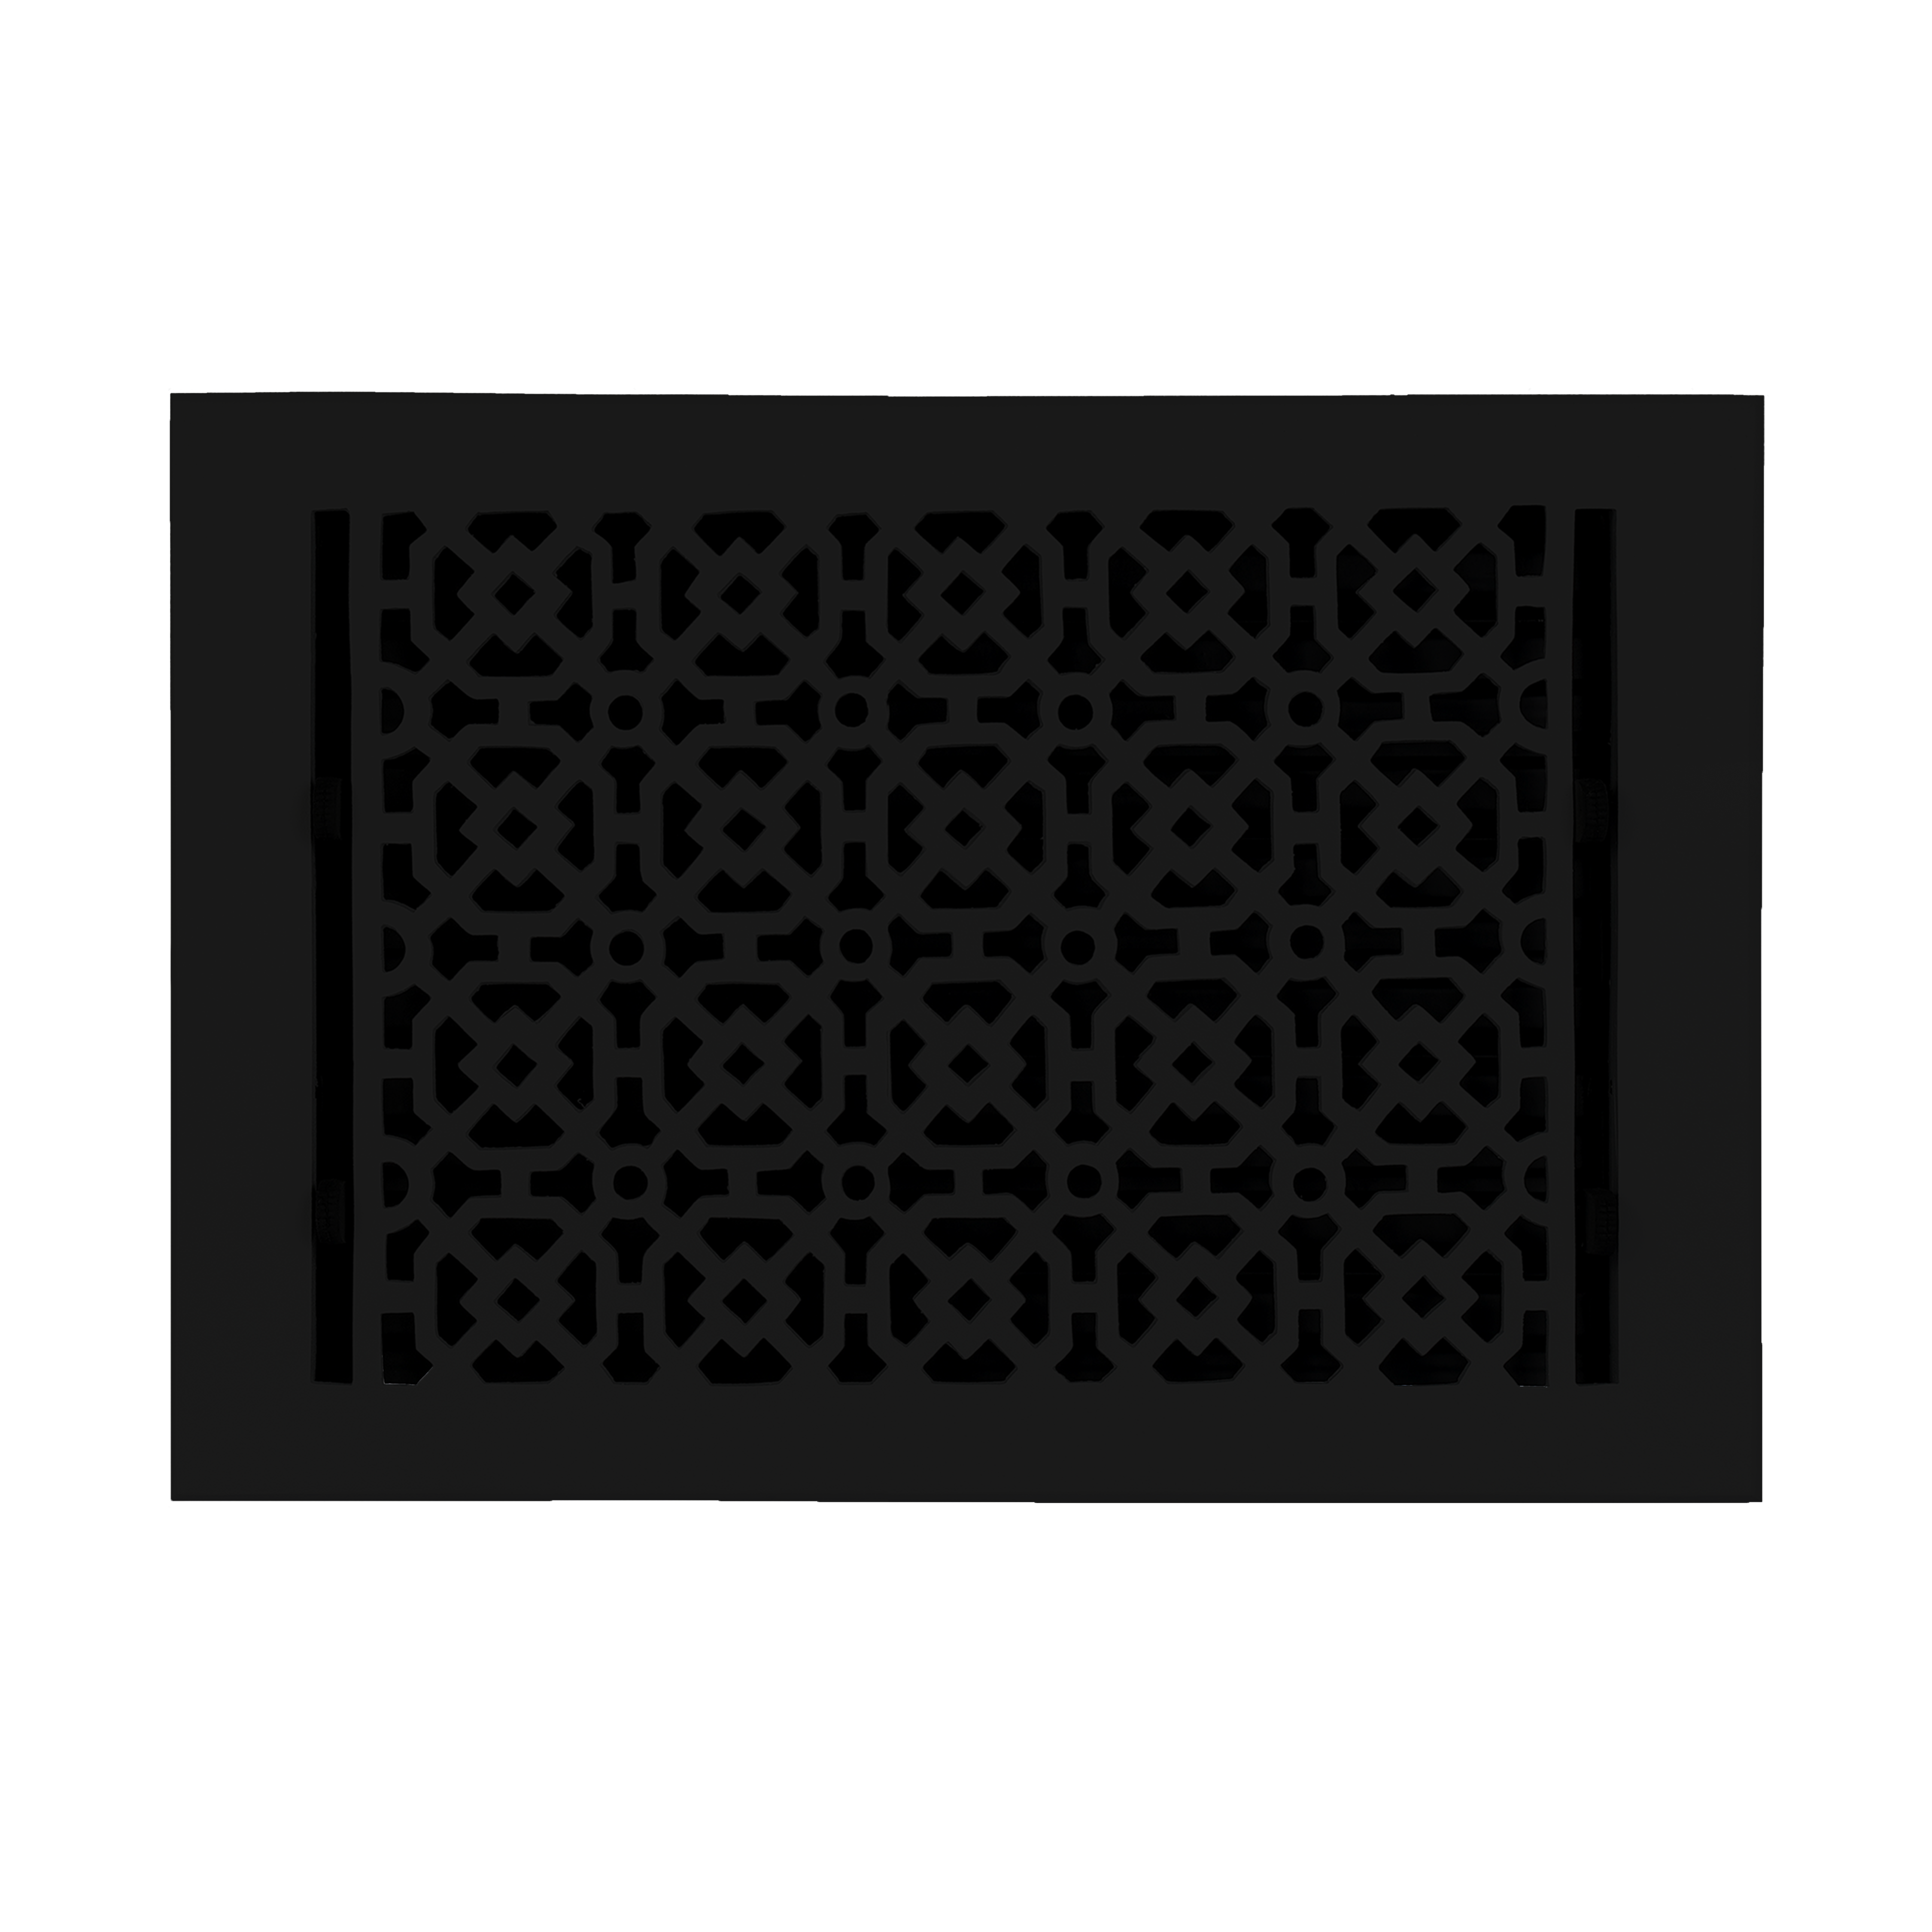 Achtek Air Supply Vent 8"x 14" Duct Opening (Overall 9-1/2"x 15-3/4") Solid Cast Aluminium Register Cover | Powder Coated